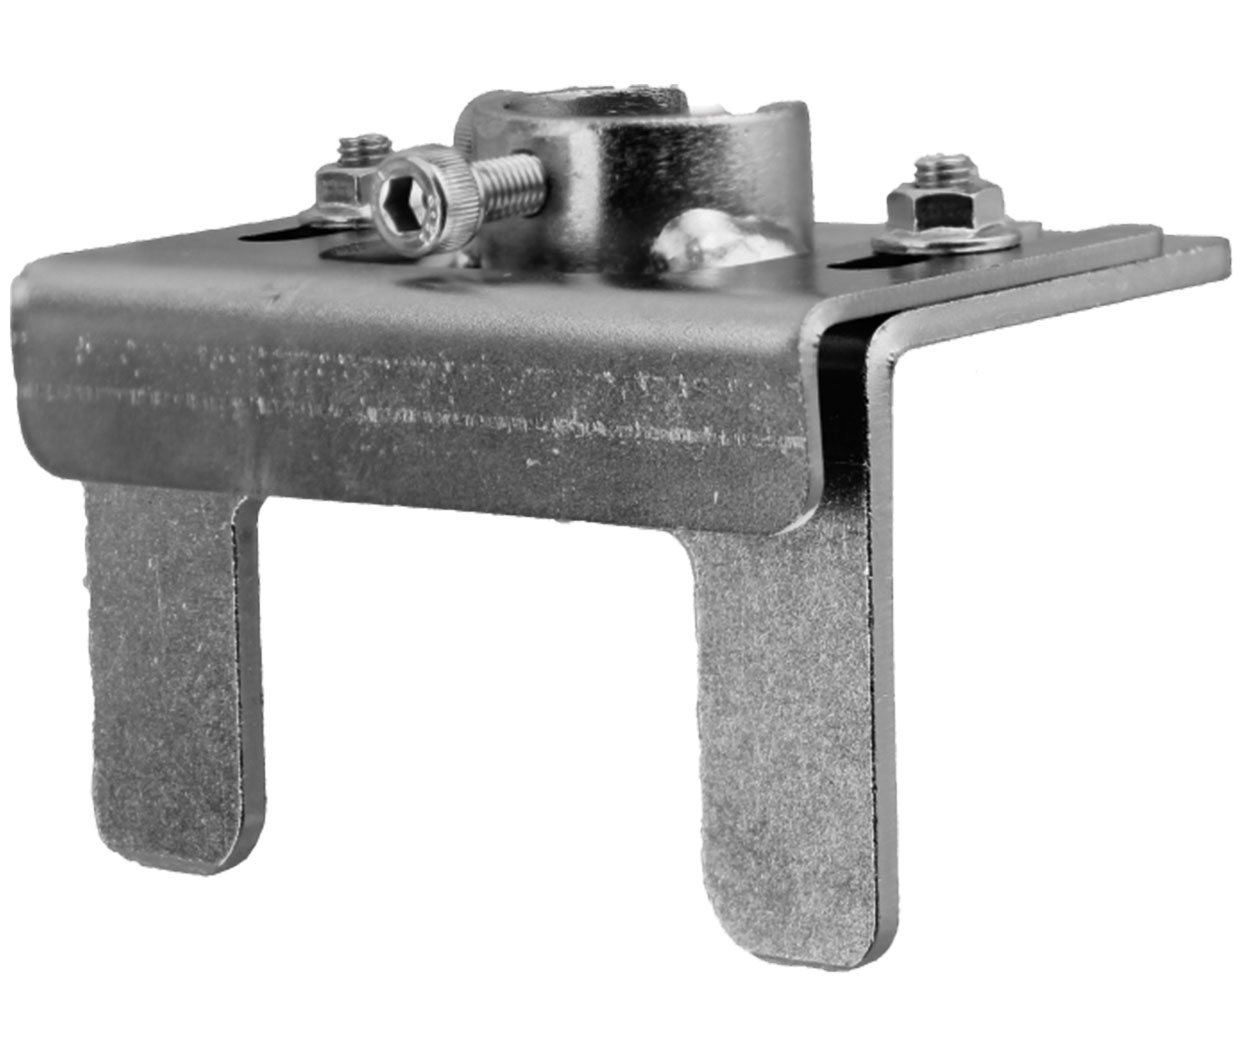 MURO DECK ATTACHMENT FOR CH7390 TOOL - 3- 25MM GAP ADJUSTMENT